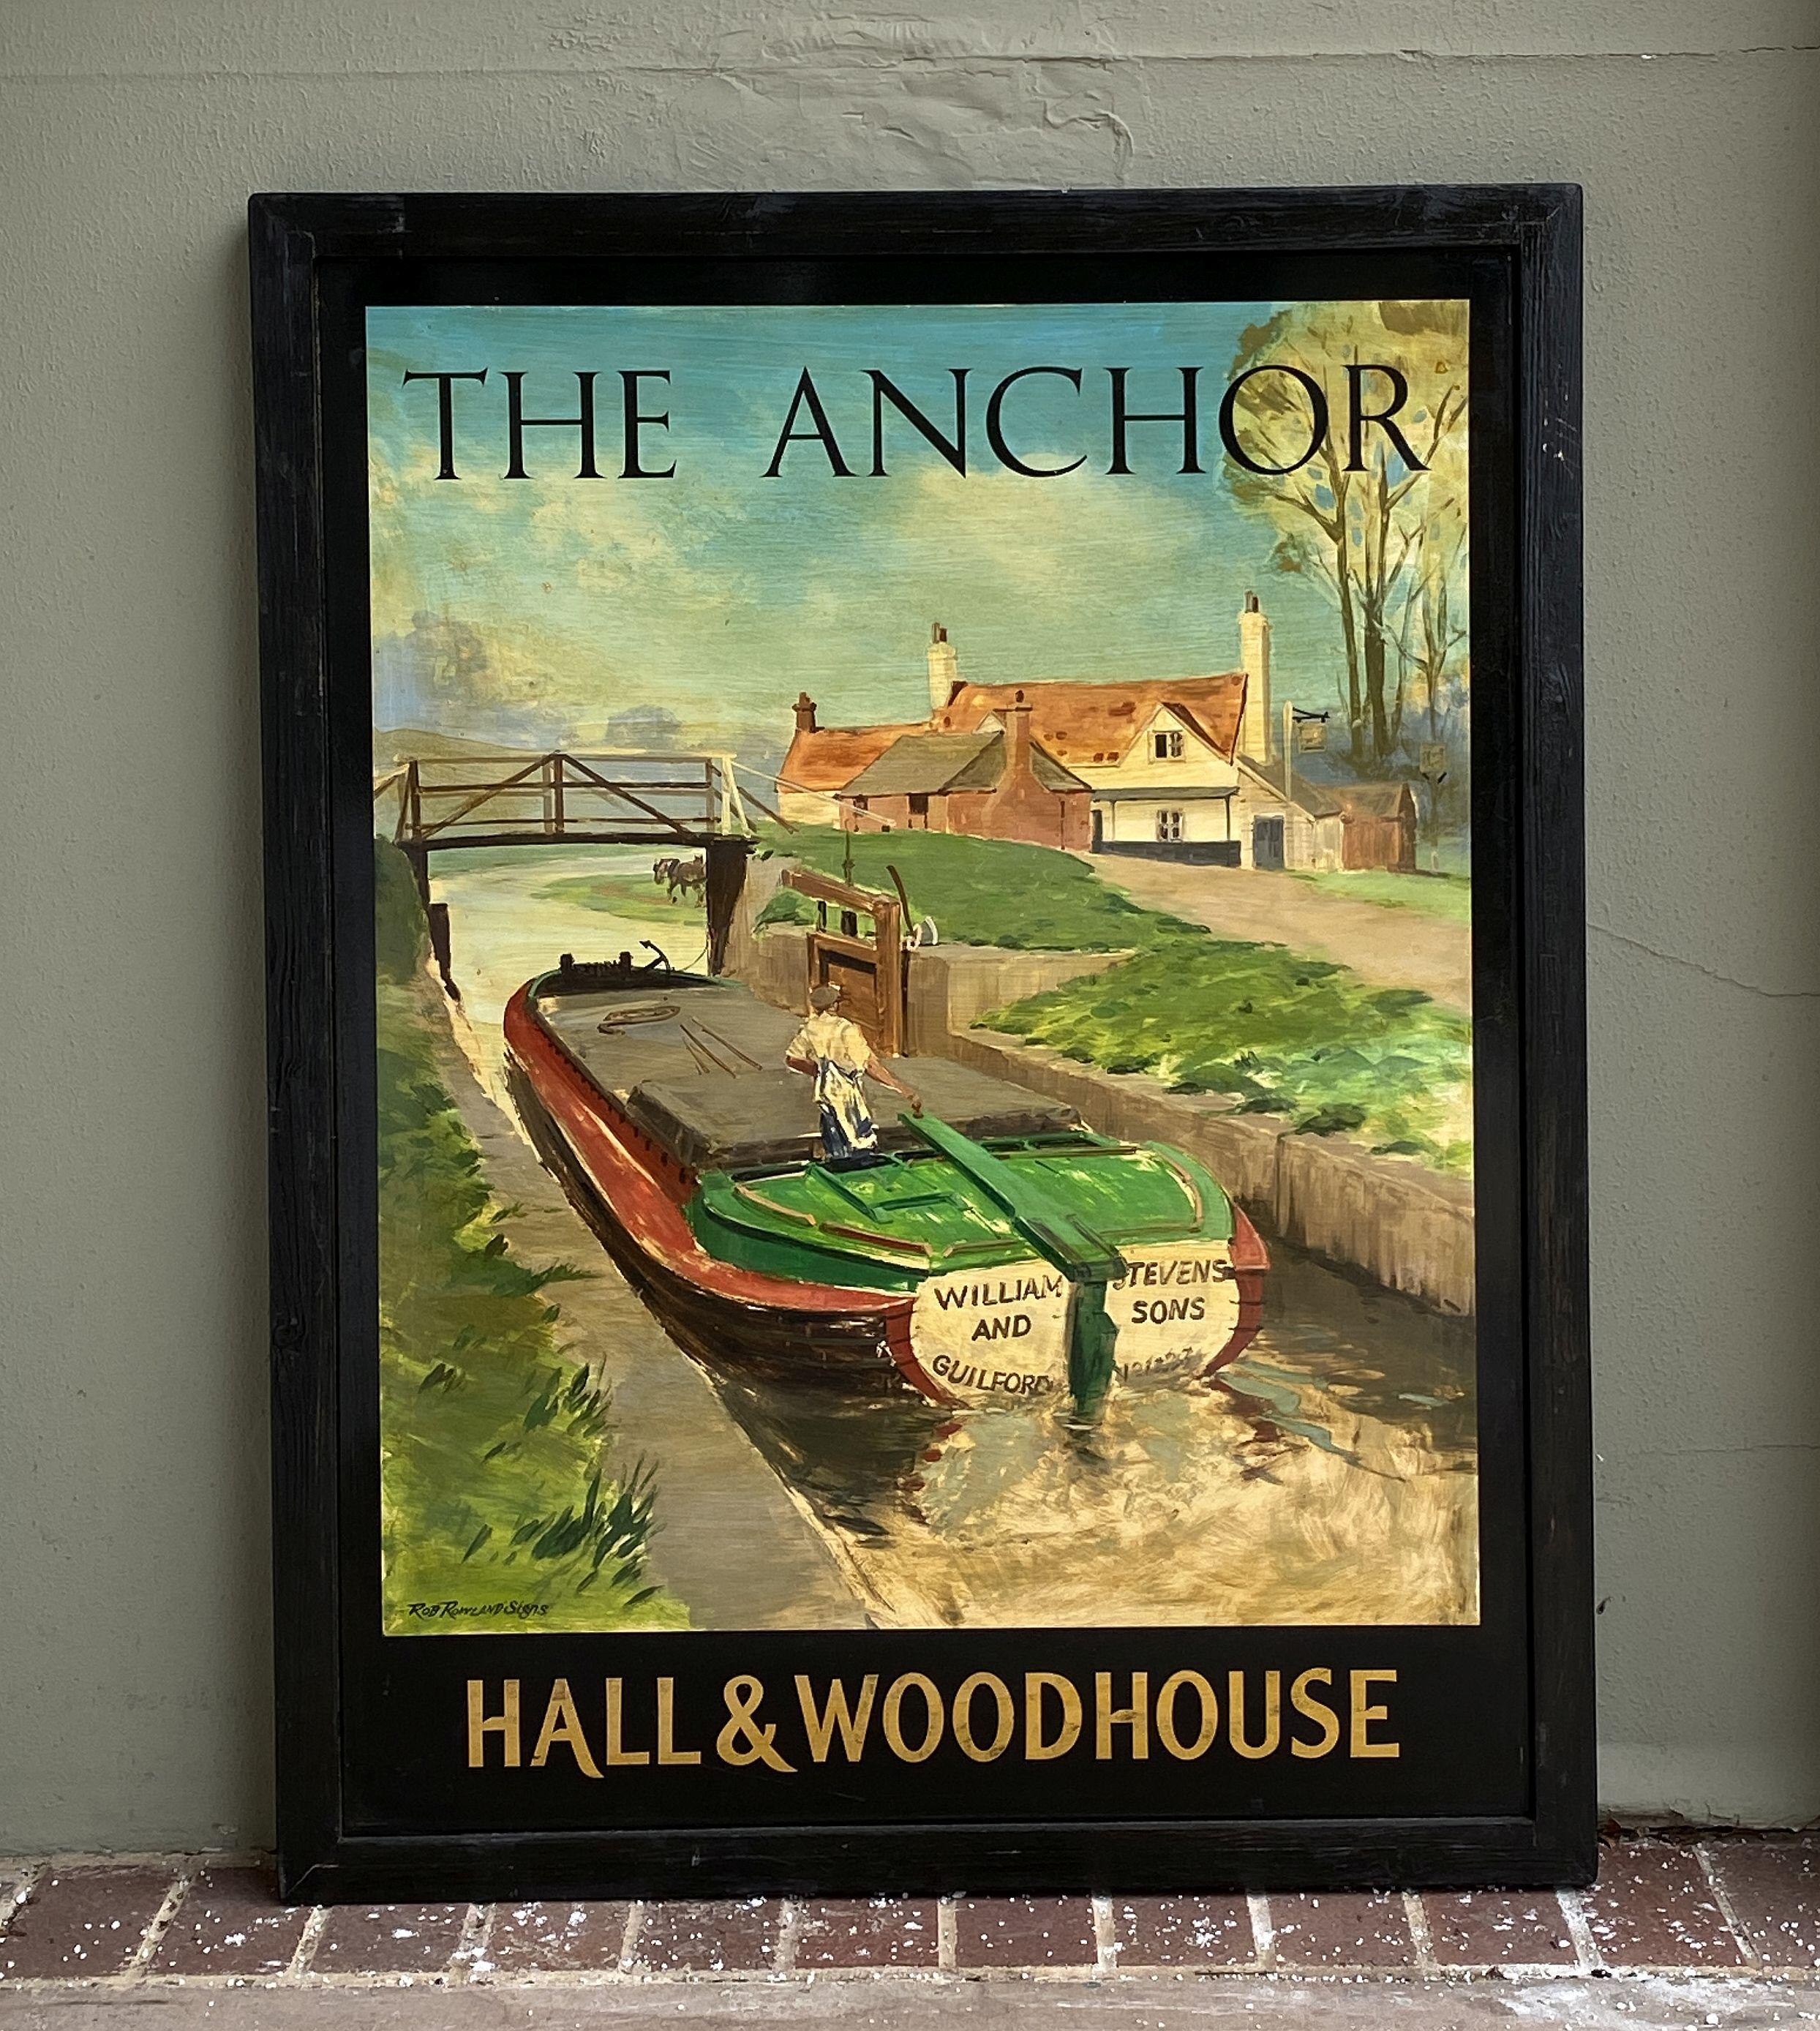 An authentic English pub sign (one-sided) featuring a painting of a barge navigating a canal, entitled: The Anchor - Hall & Woodhouse.

A very fine example of vintage advertising artwork, ready for display.

Hall and Woodhouse is a British regional